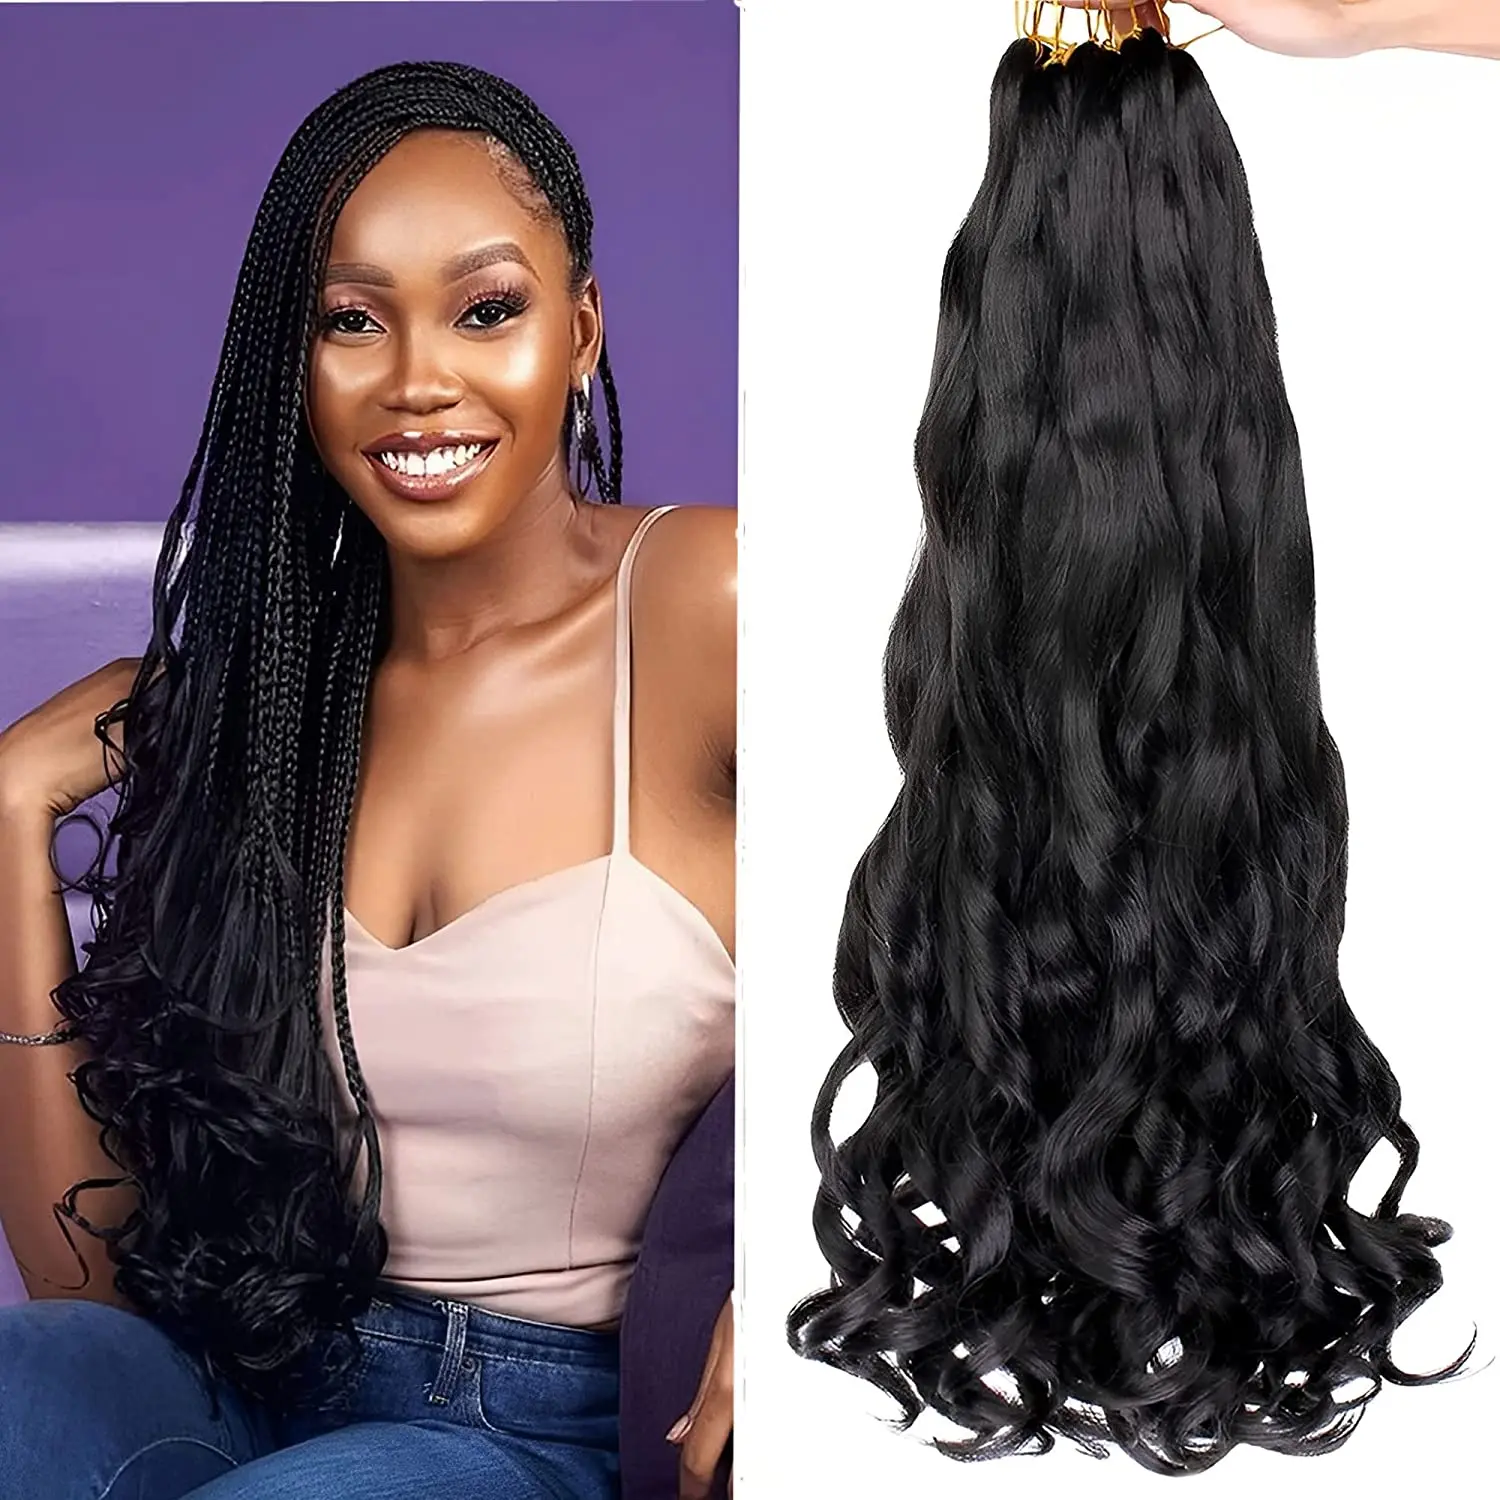 

Black Star 22 inch Loose Wave Spiral Curl Crochet HairPre Stretched french braiding hair with curly Ombre Braids Hair For Women